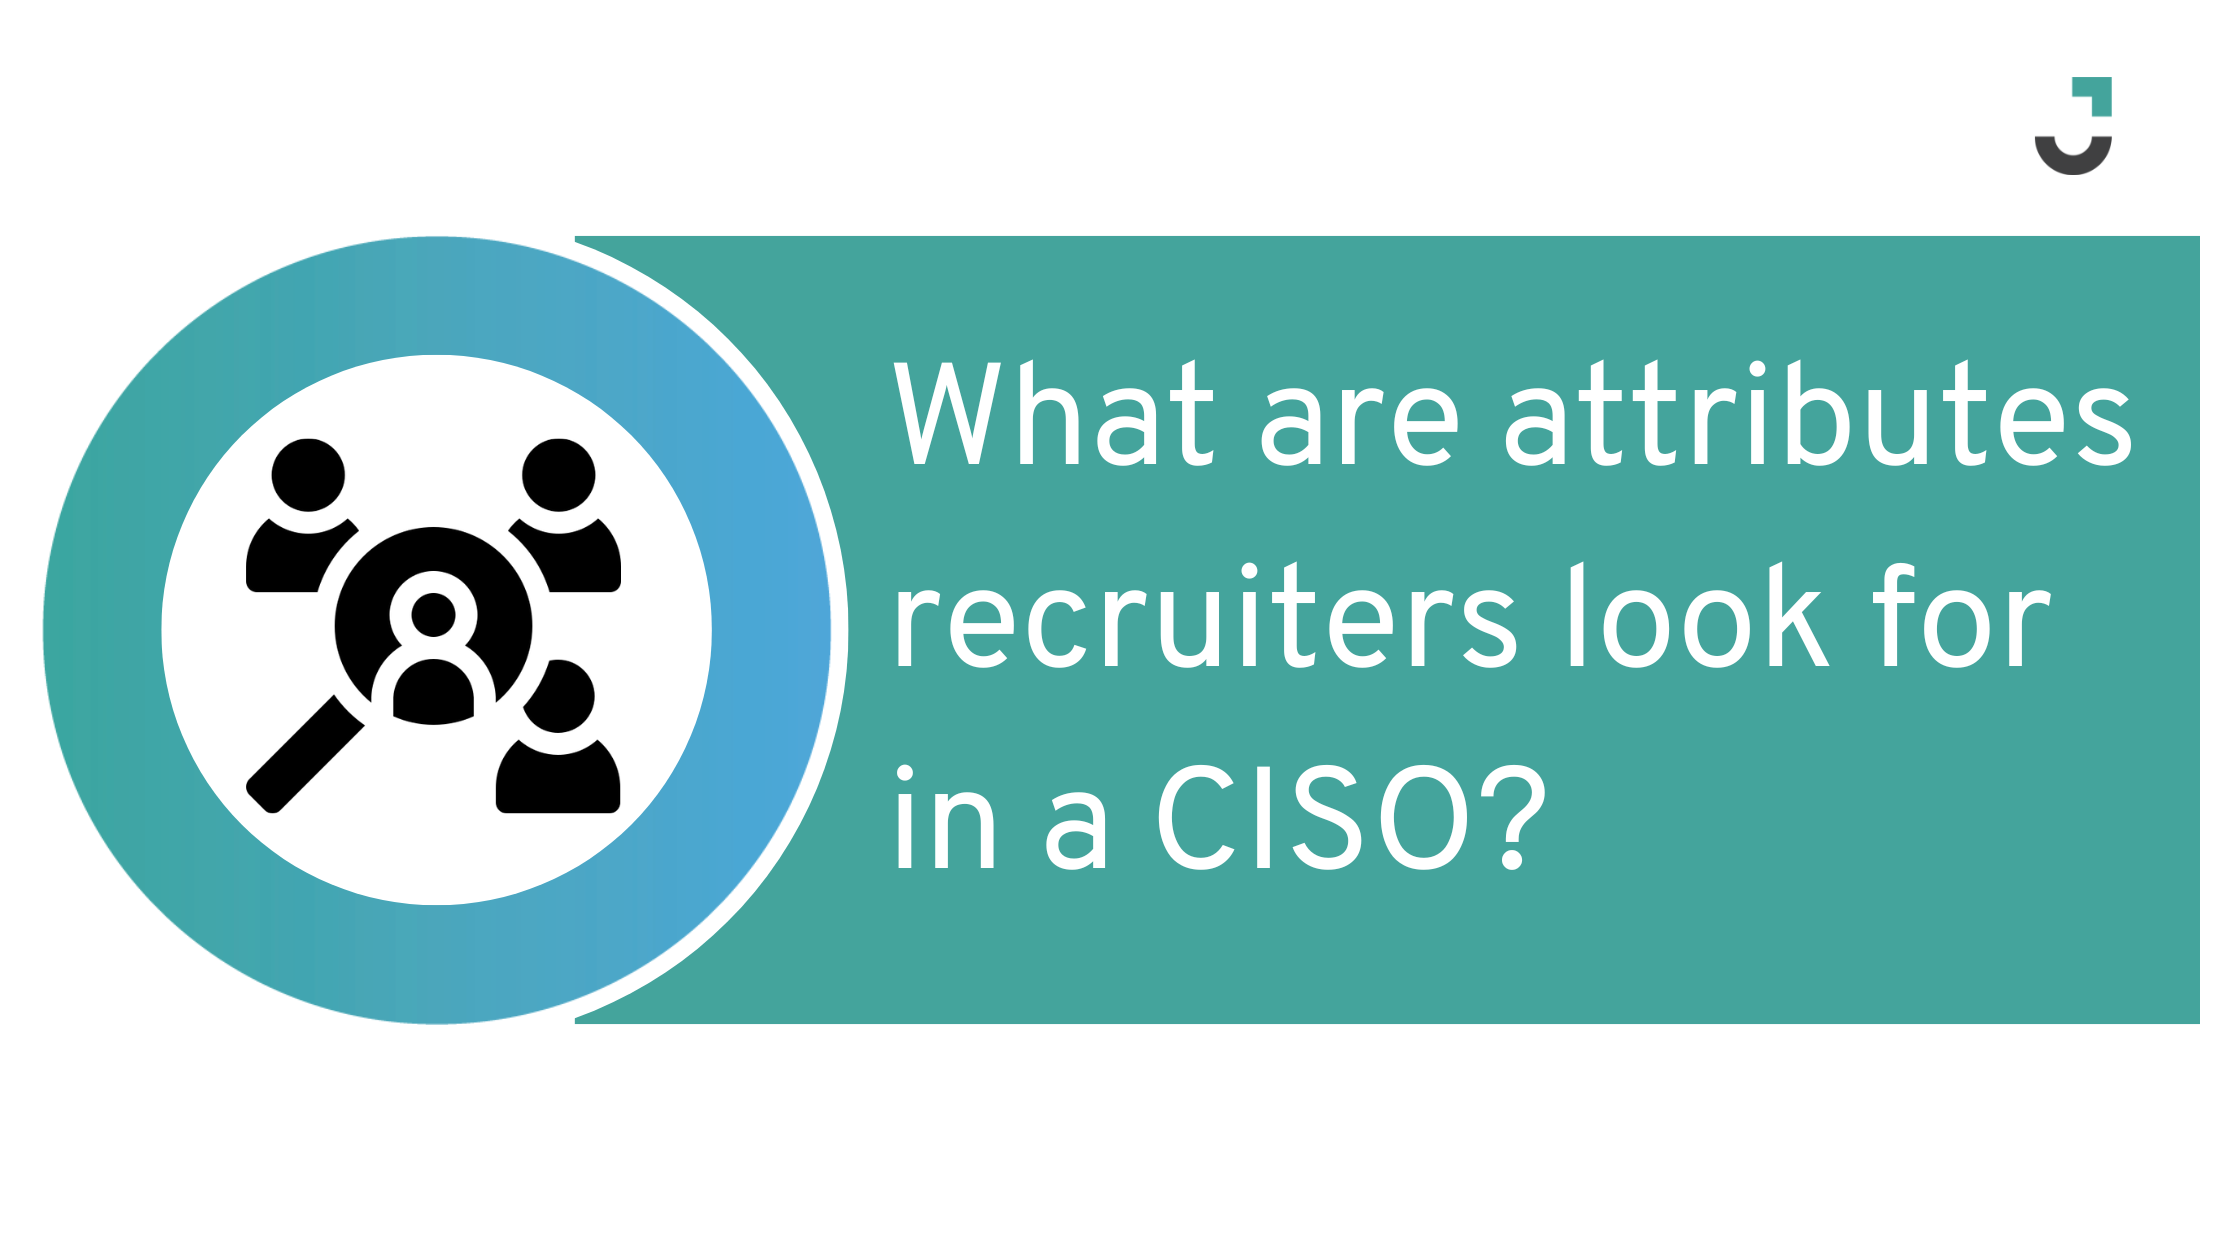 What are attributes recruiters look for in a CISO?